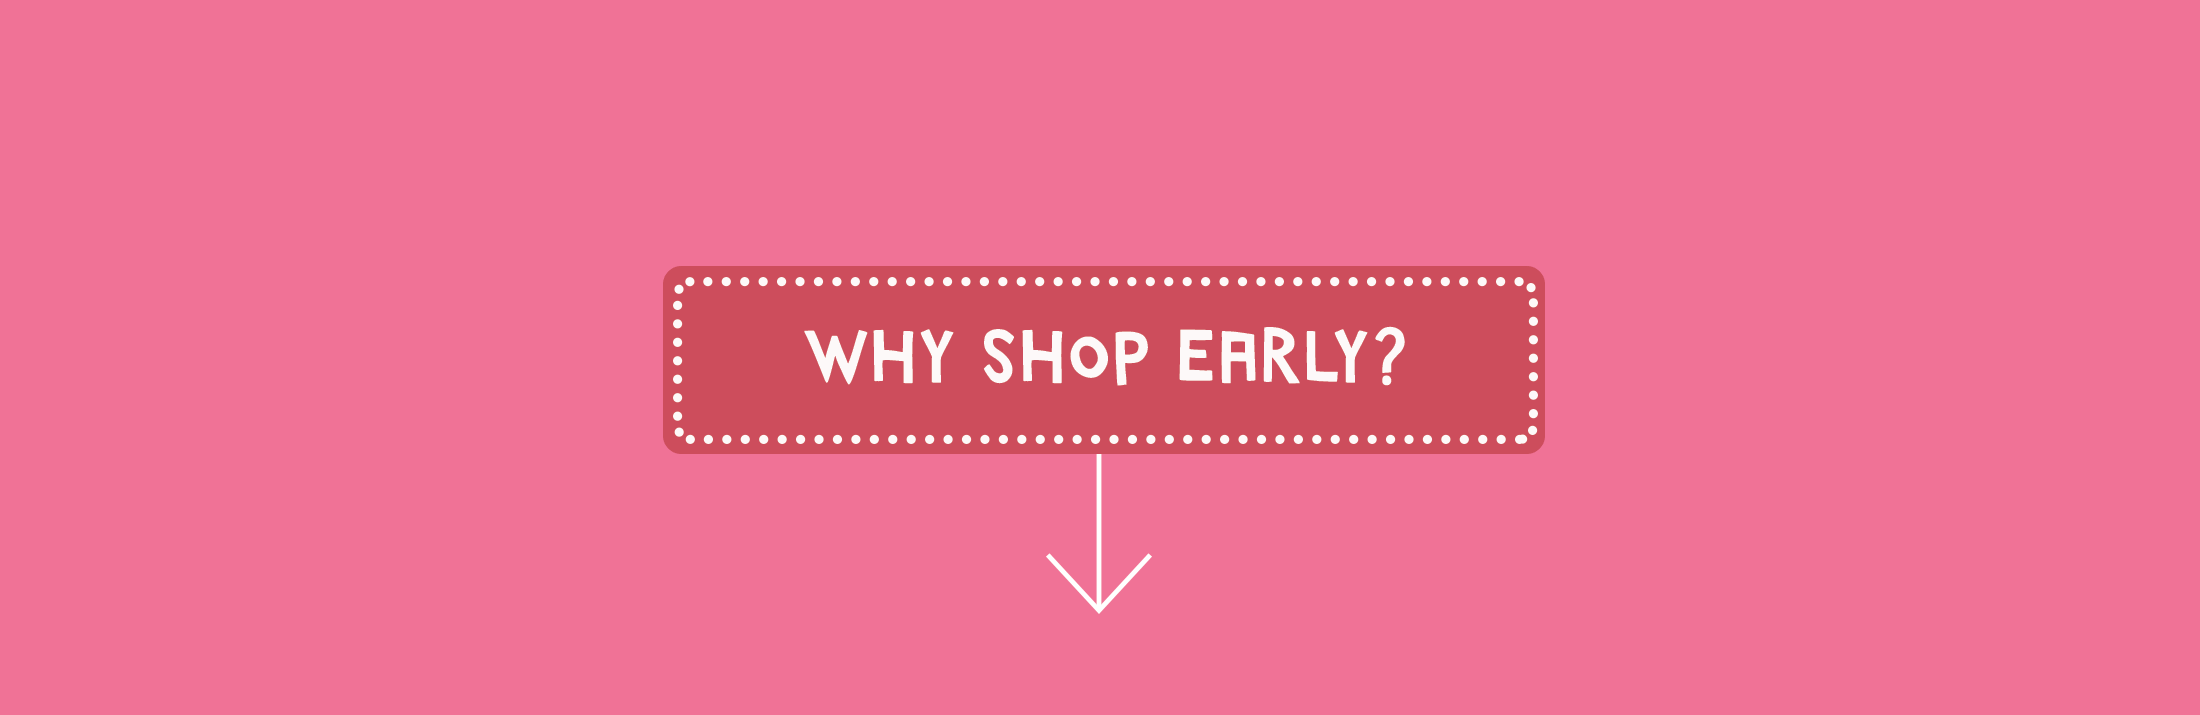 Why shop early?